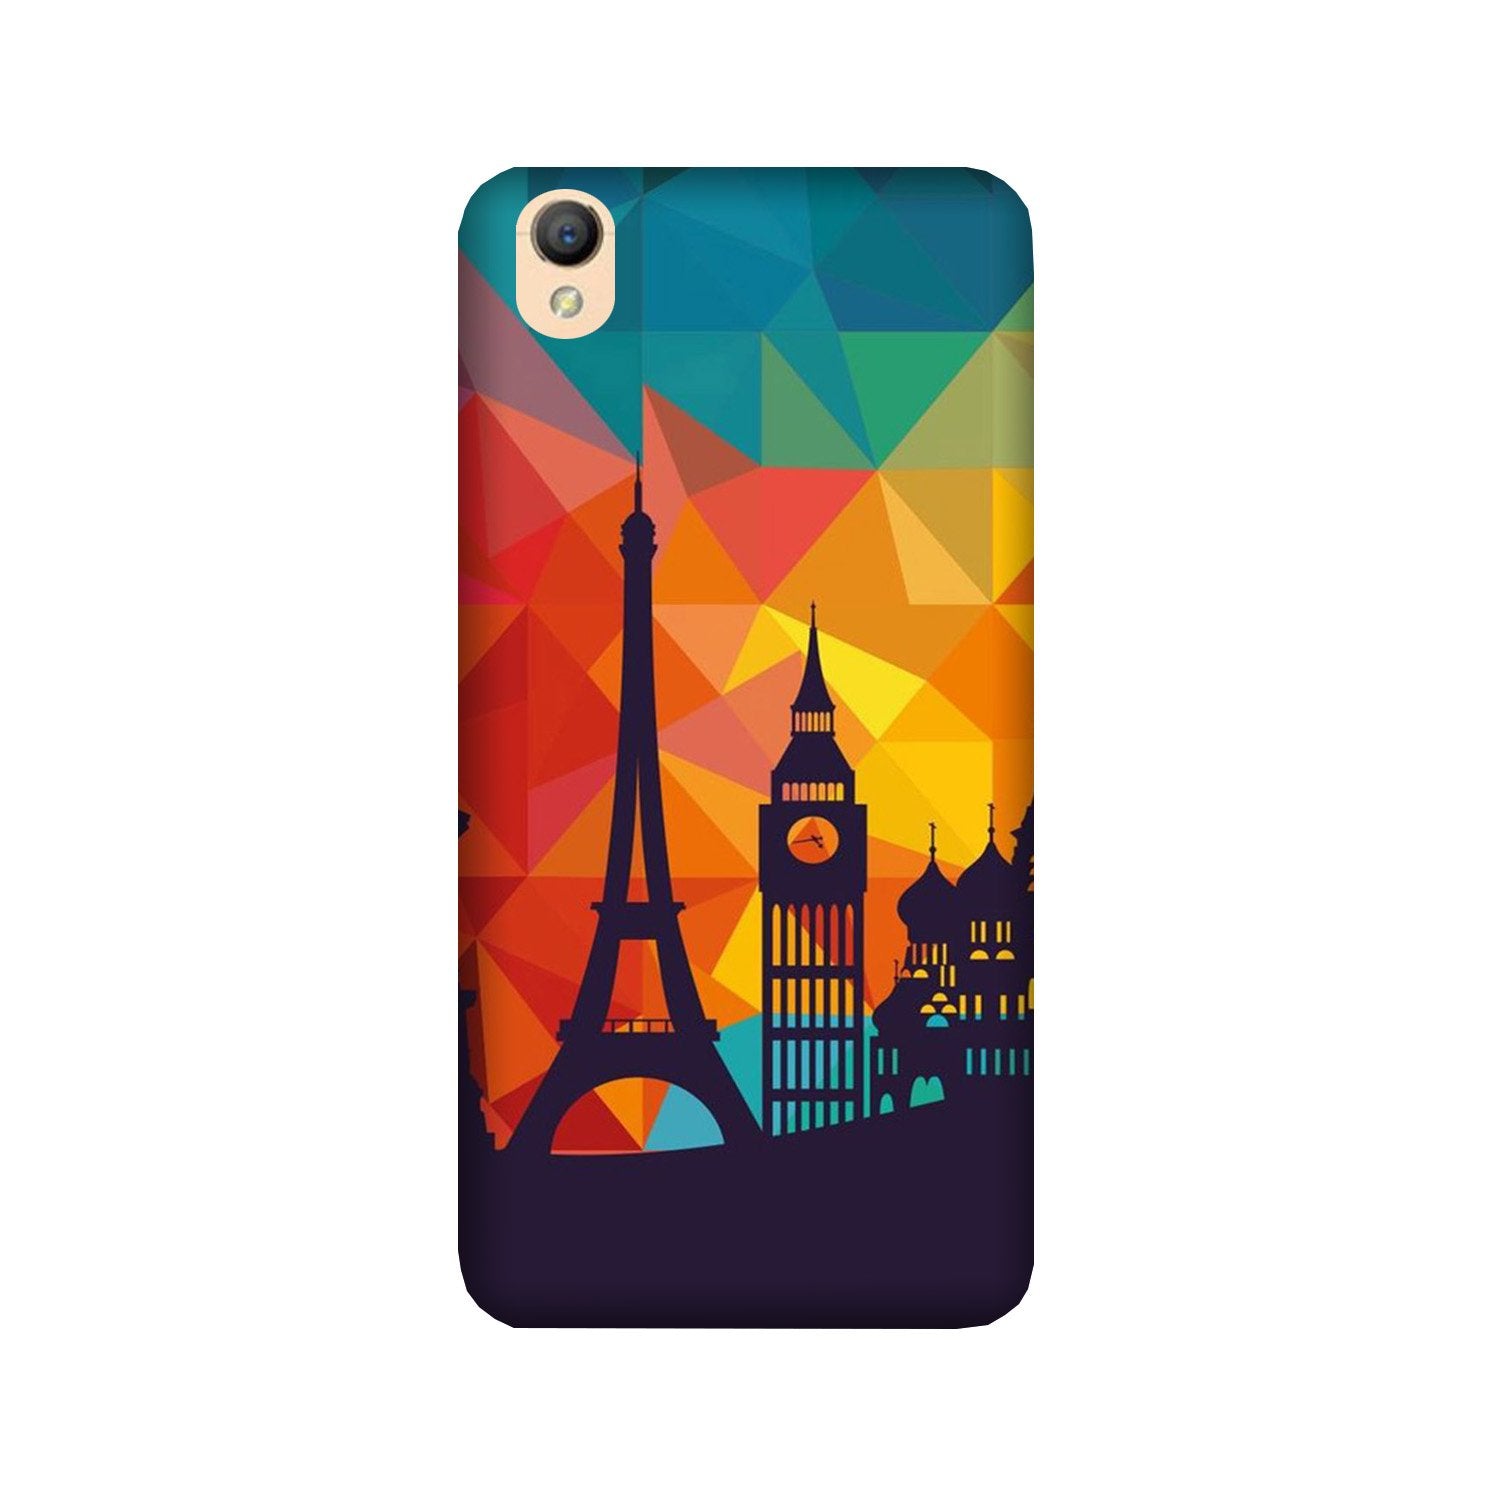 Eiffel Tower2 Case for Oppo A37